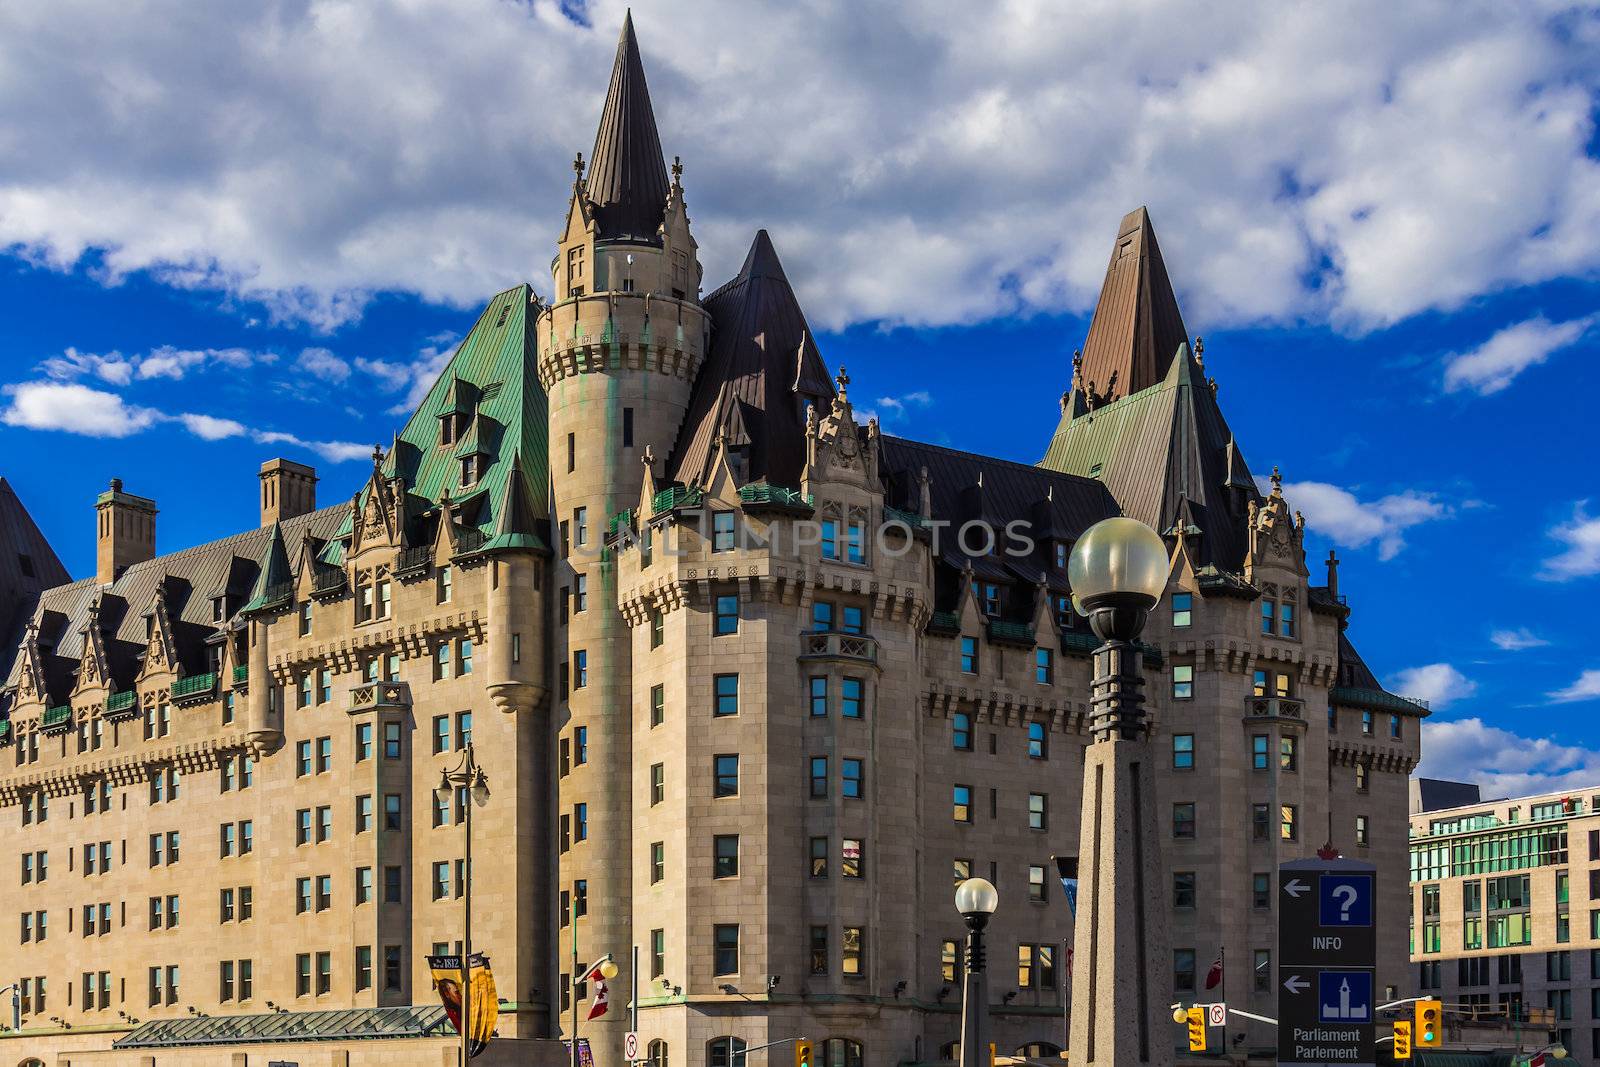 Ottawa's Old Chateau Laurier Hotel by petkolophoto